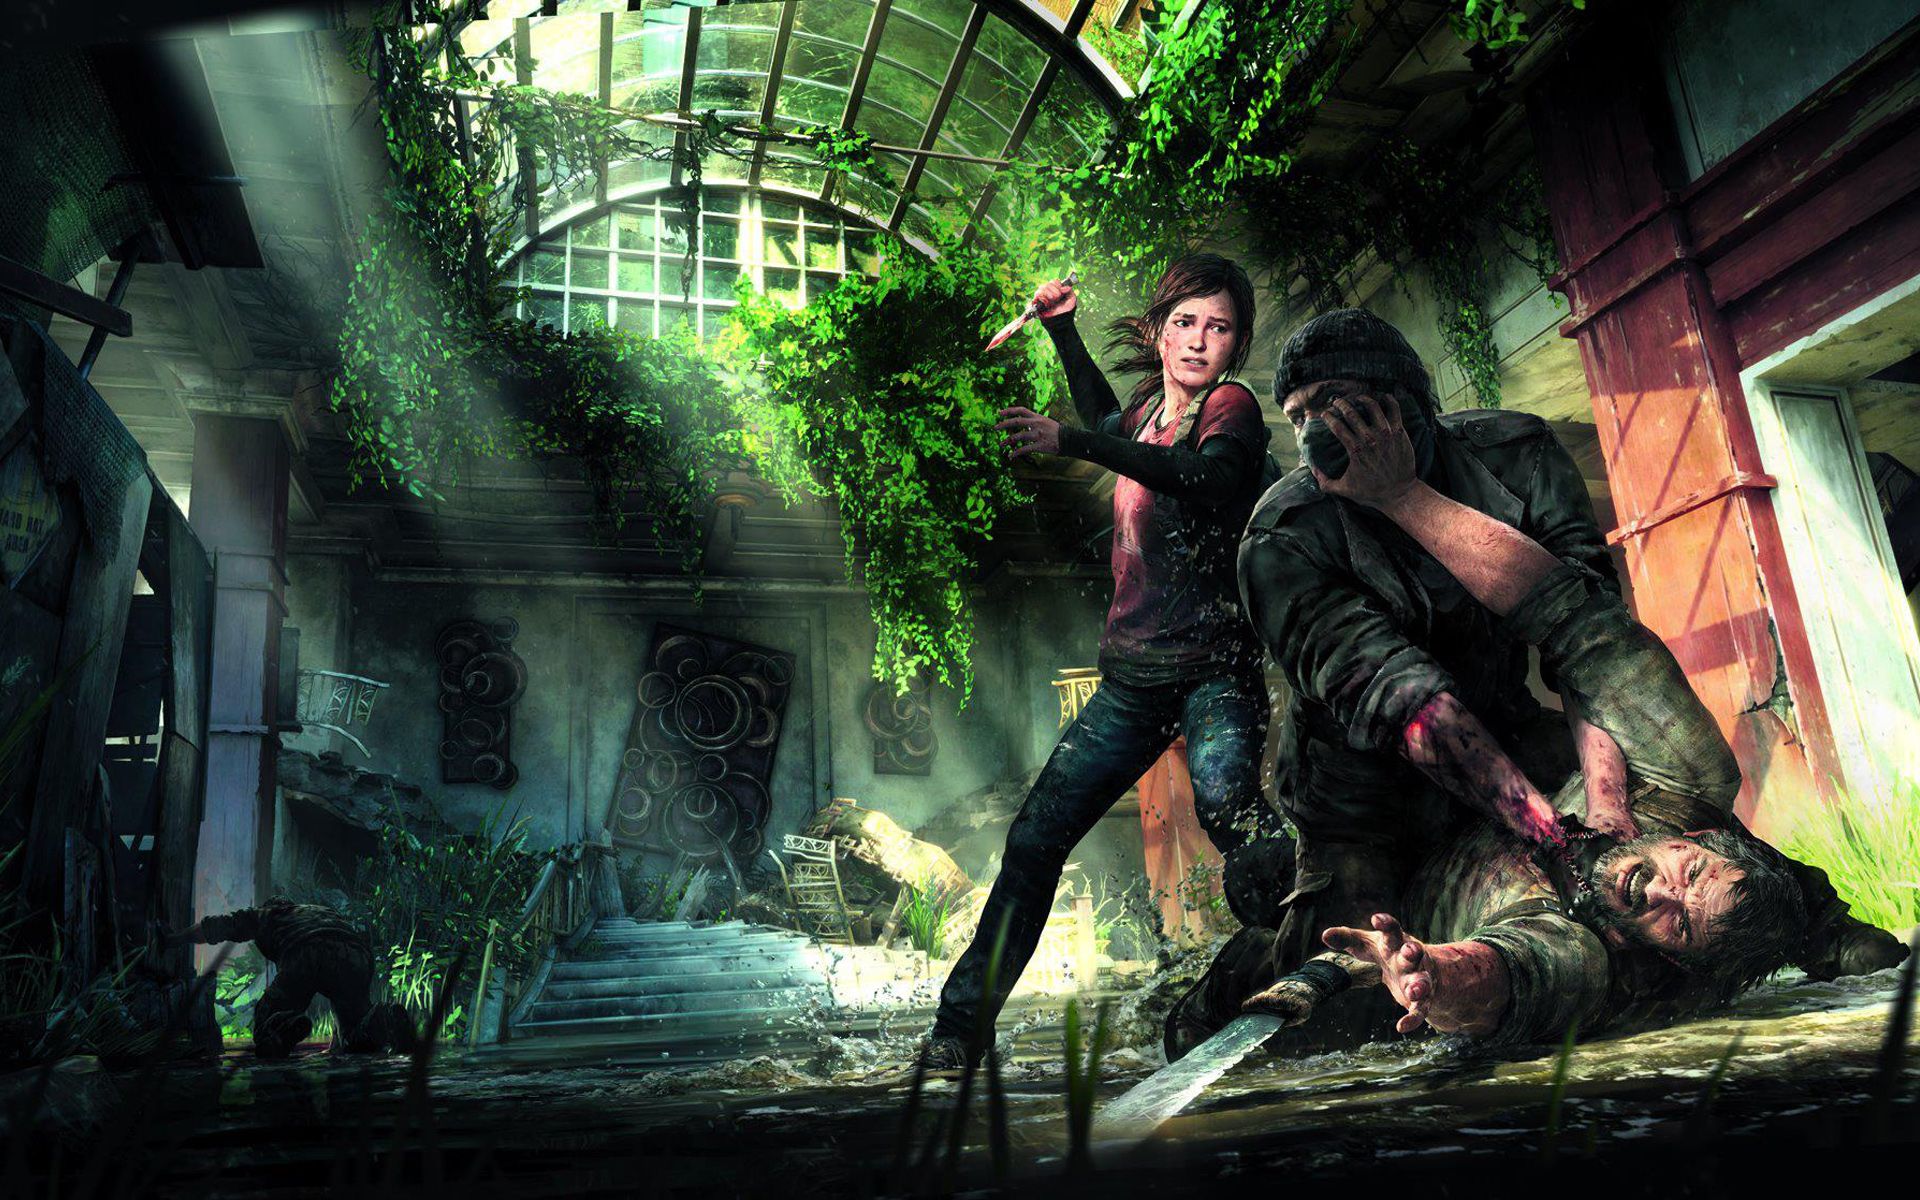 Last of Us TV Series Coming to HBO with Neil Druckmann, Craig